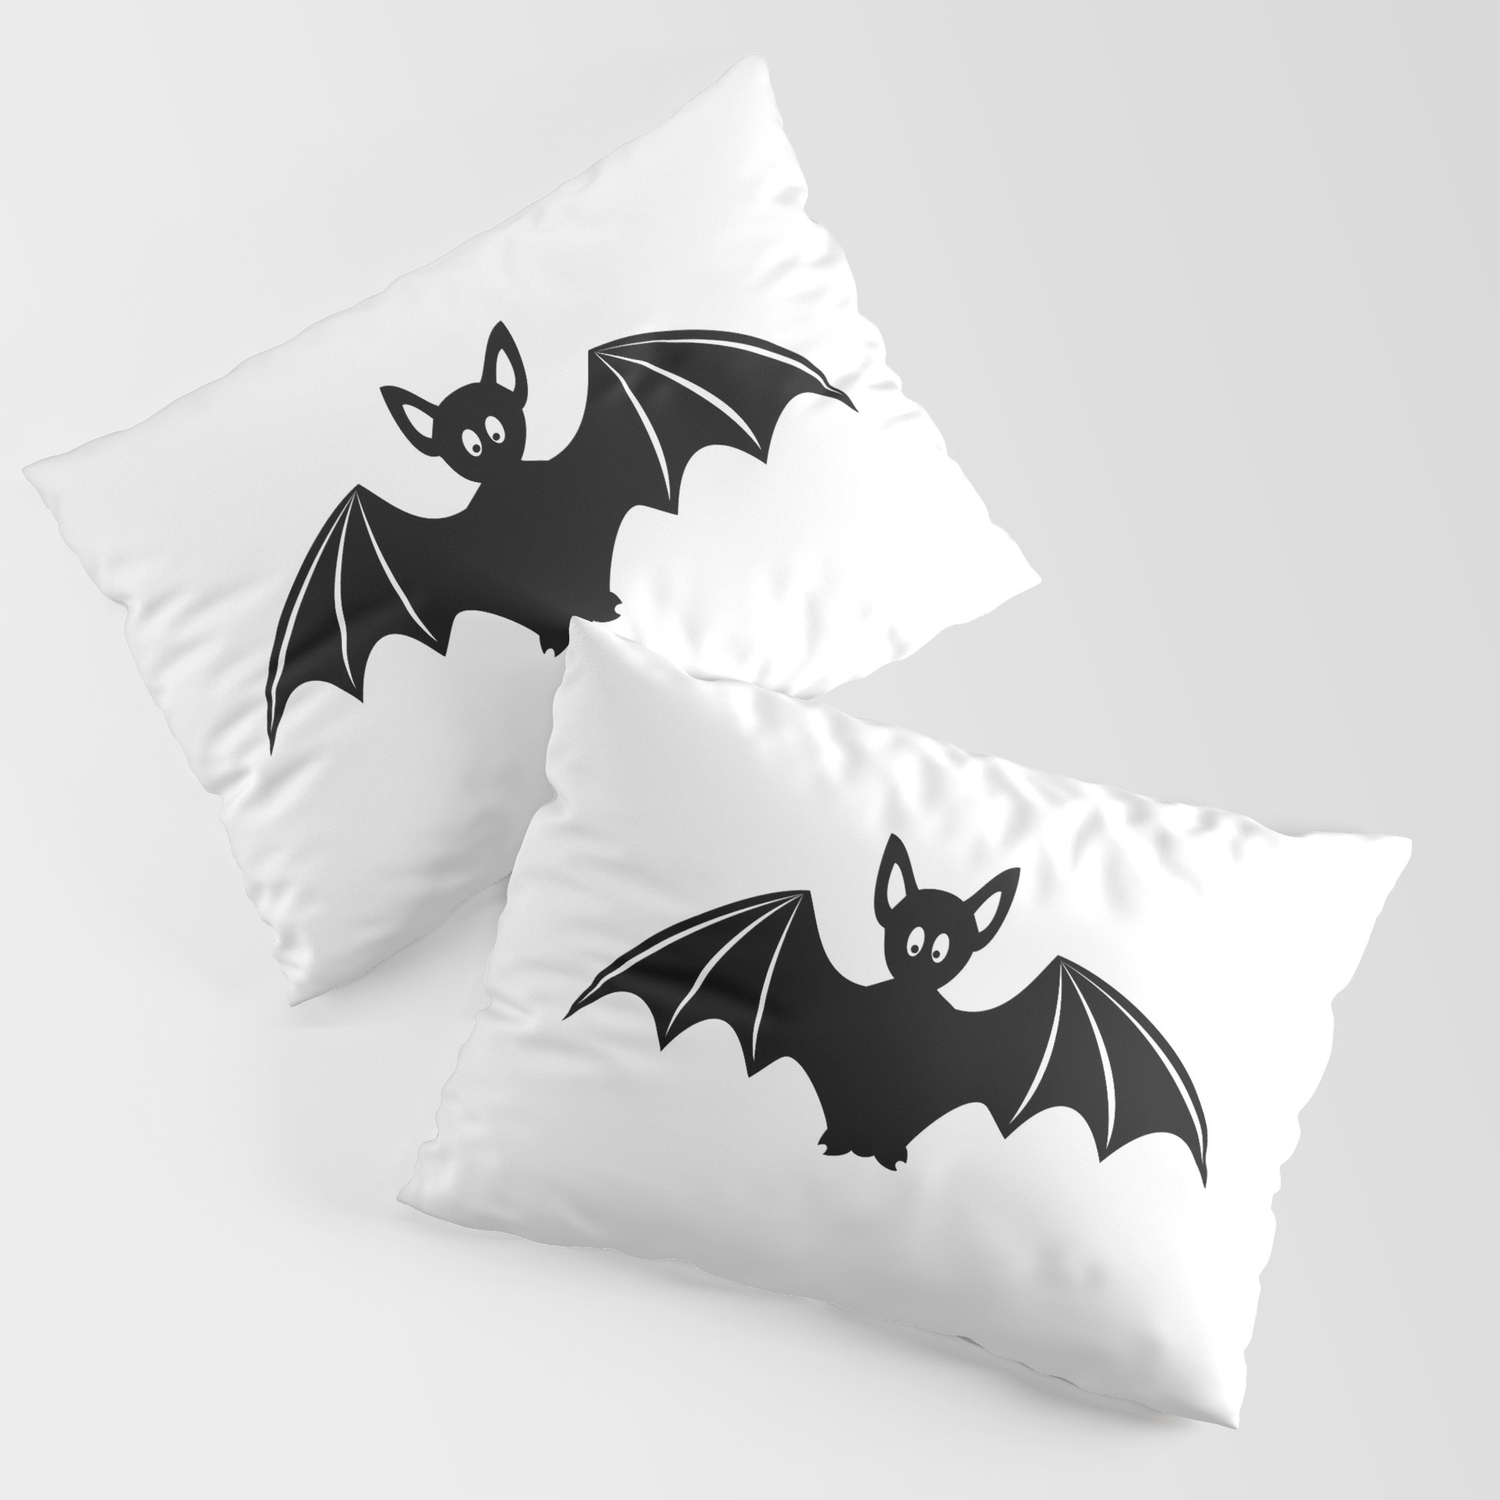 Microfiber Polyester King Set of 2 Society6 Halloween by There Will Be Cute on Pillow Sham 